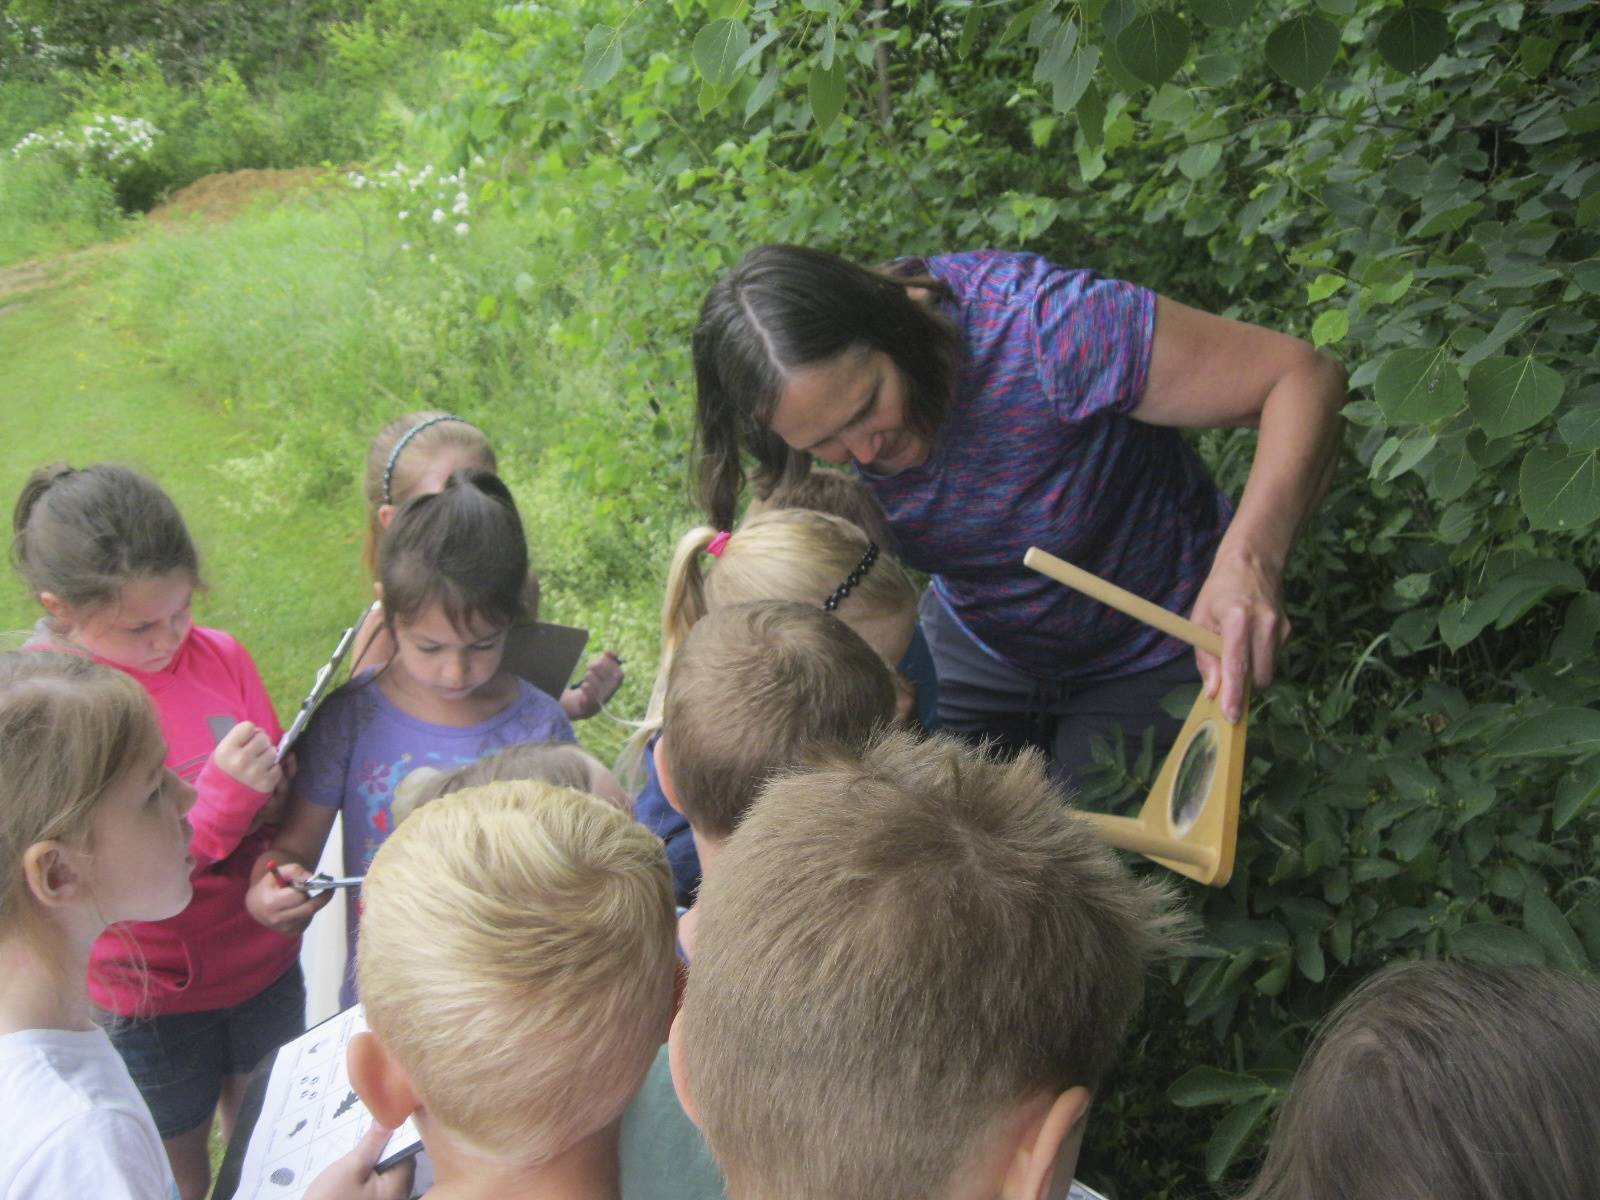 Mrs. Thompson shows students how to look closely at nature with a magnifying glass.